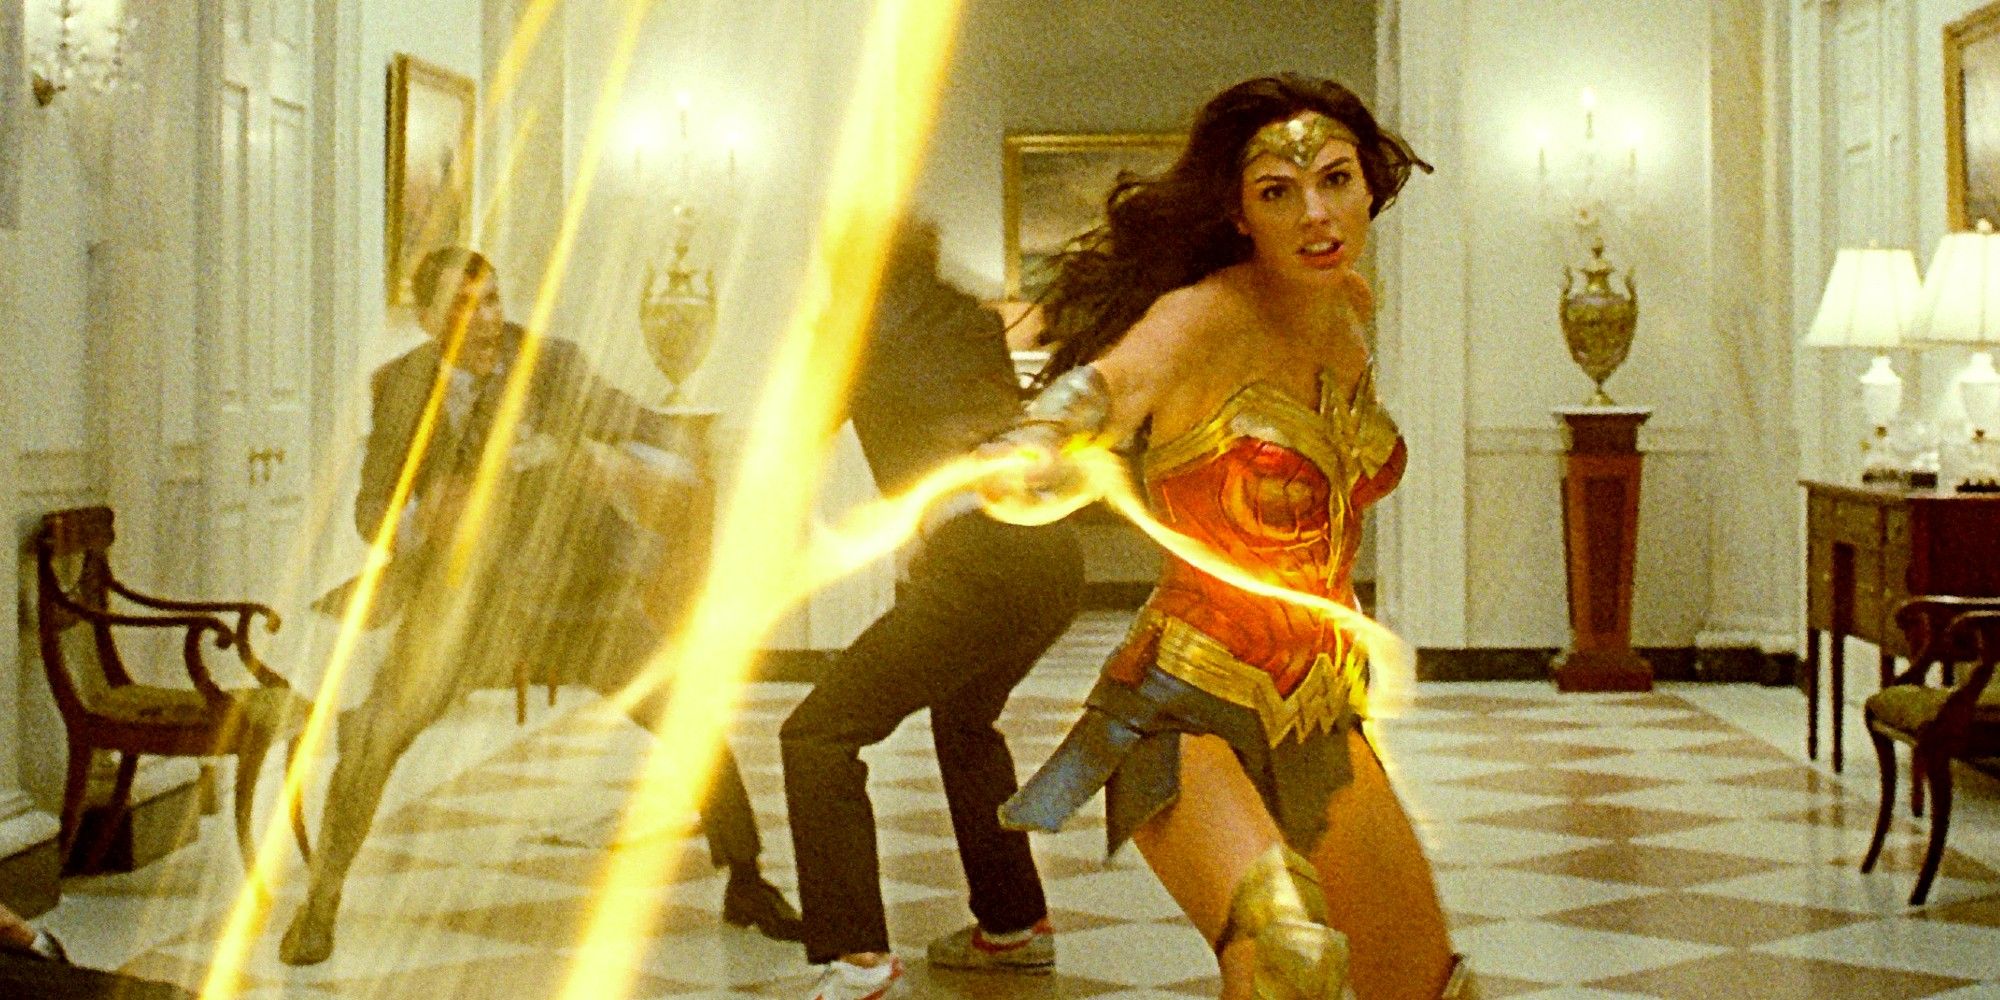 Wonder-Woman-using-the-Lasso-of-Truth-in-the-White-House.jpg